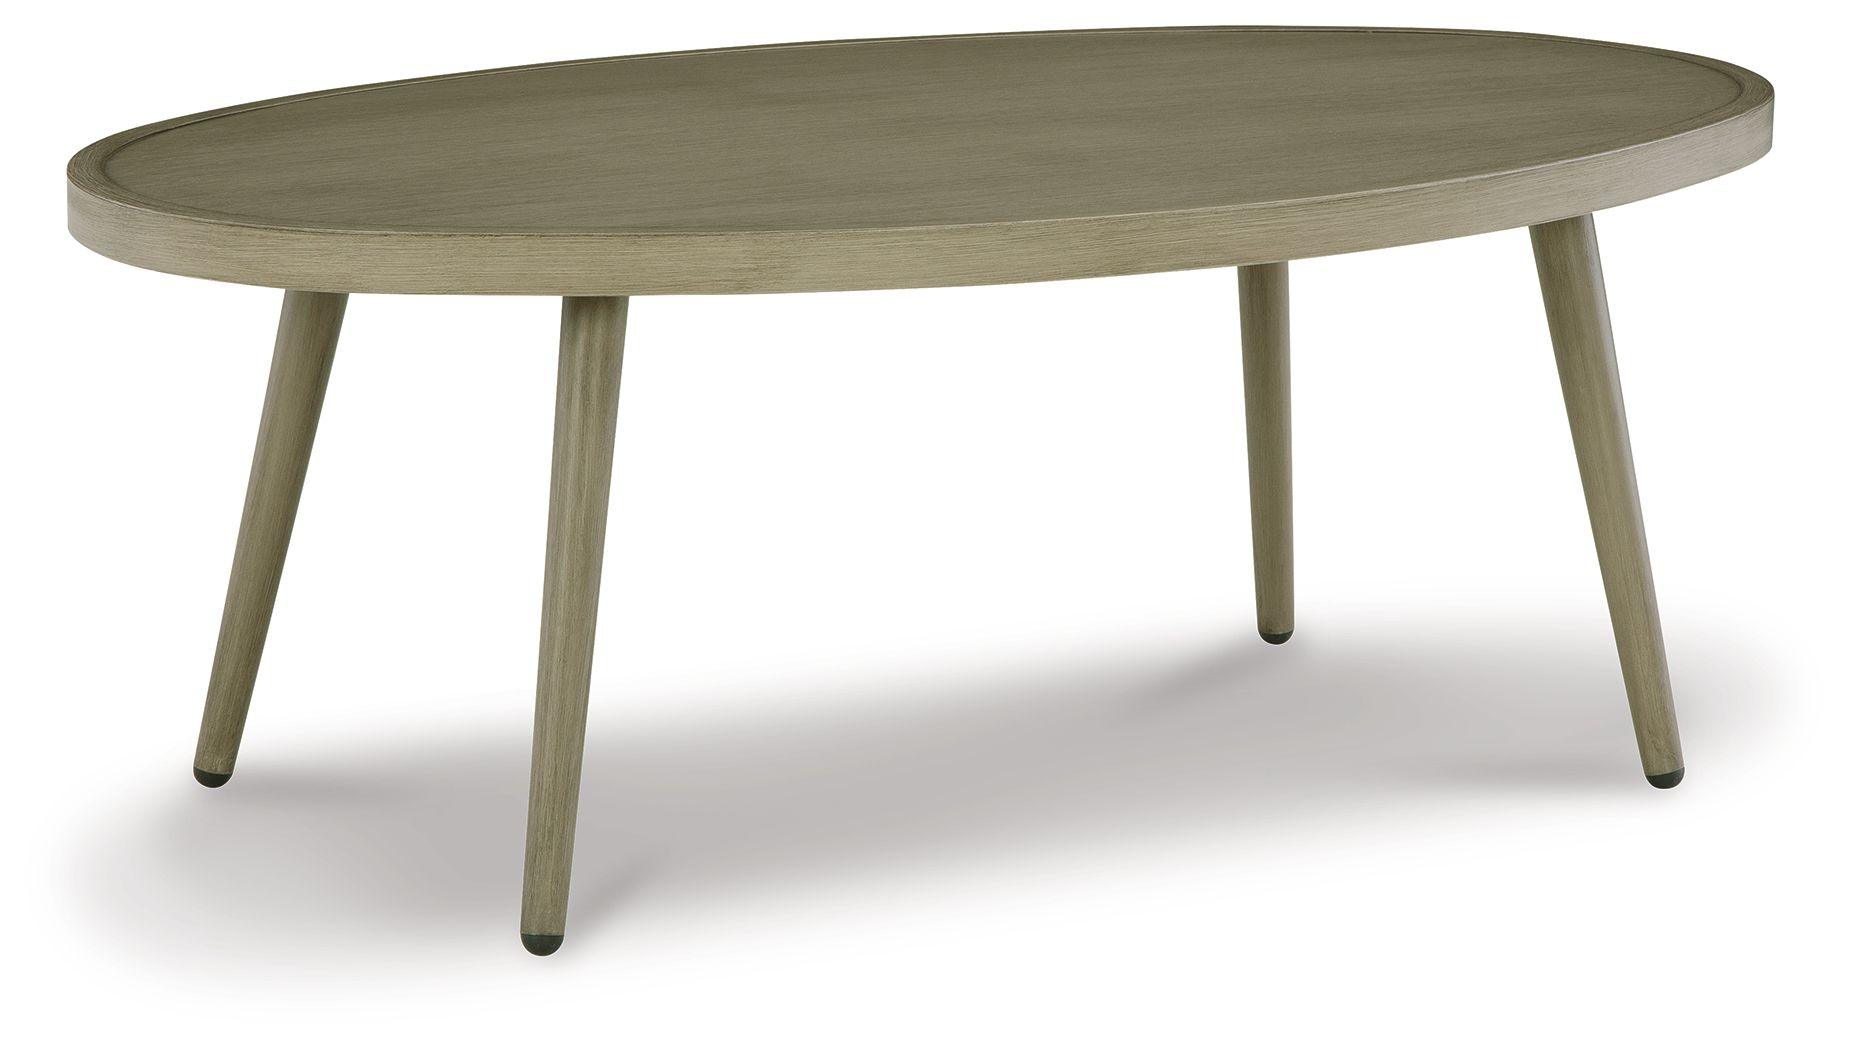 Signature Design by Ashley® - Swiss Valley - Beige - Oval Cocktail Table - 5th Avenue Furniture